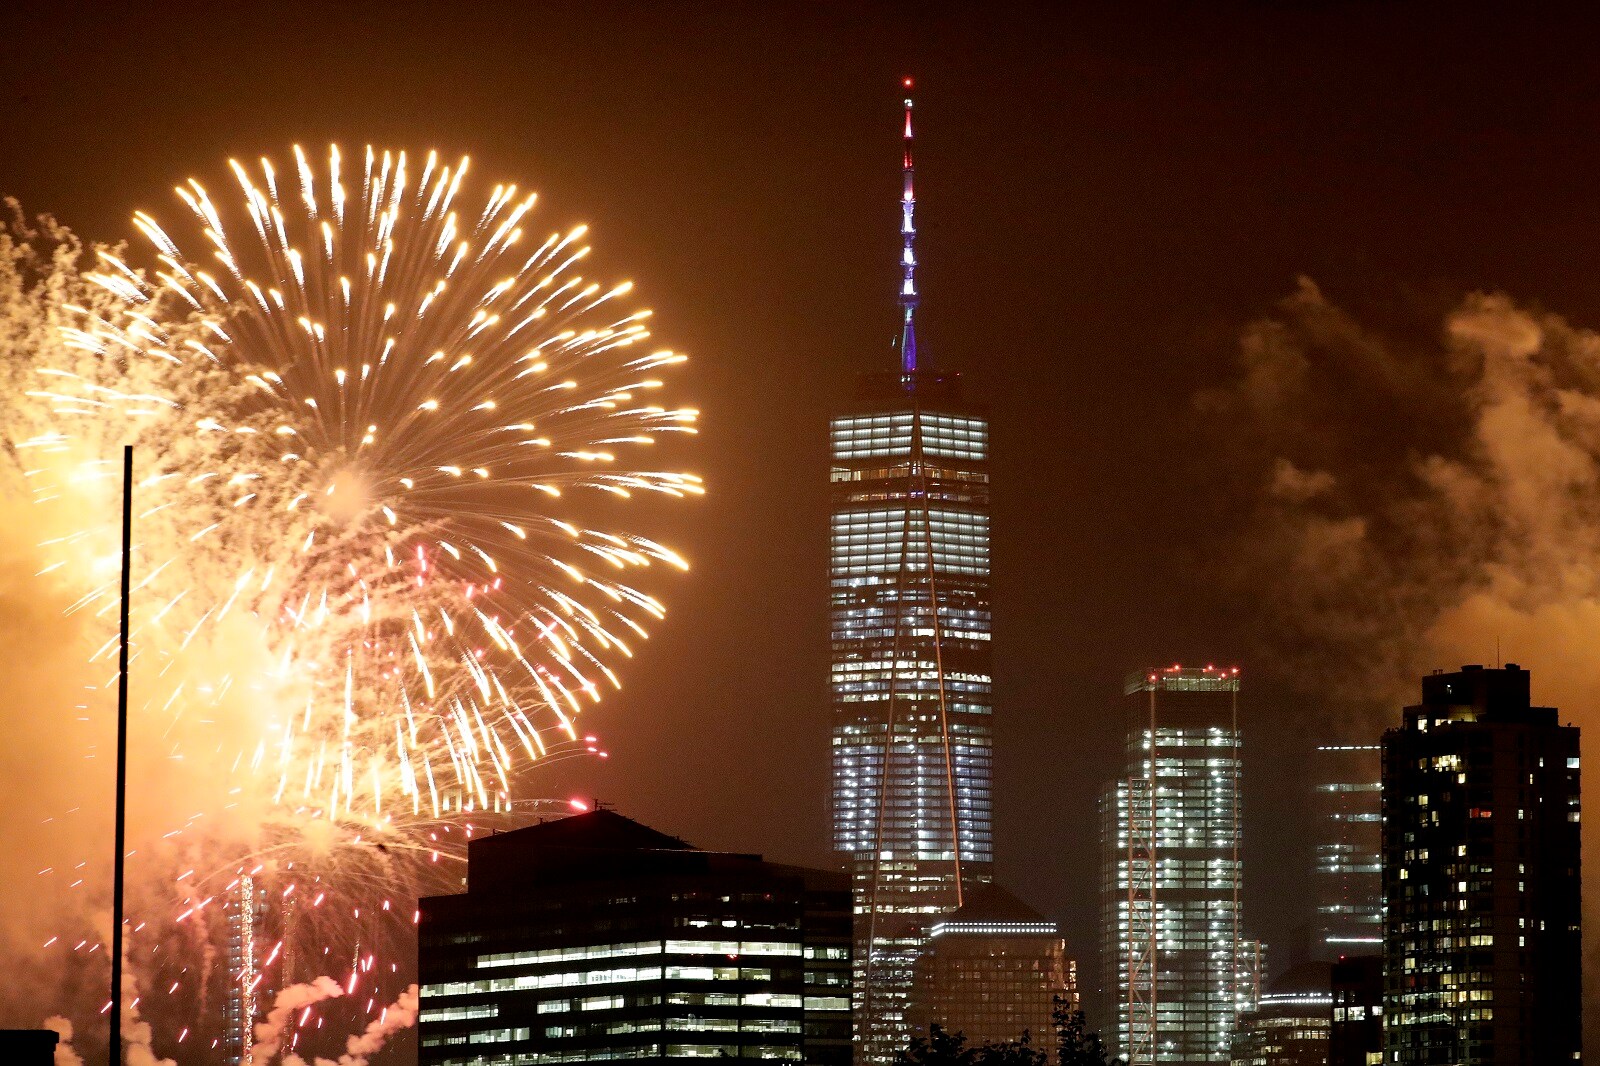 People across the US celebrate 'Fourth of July' in style